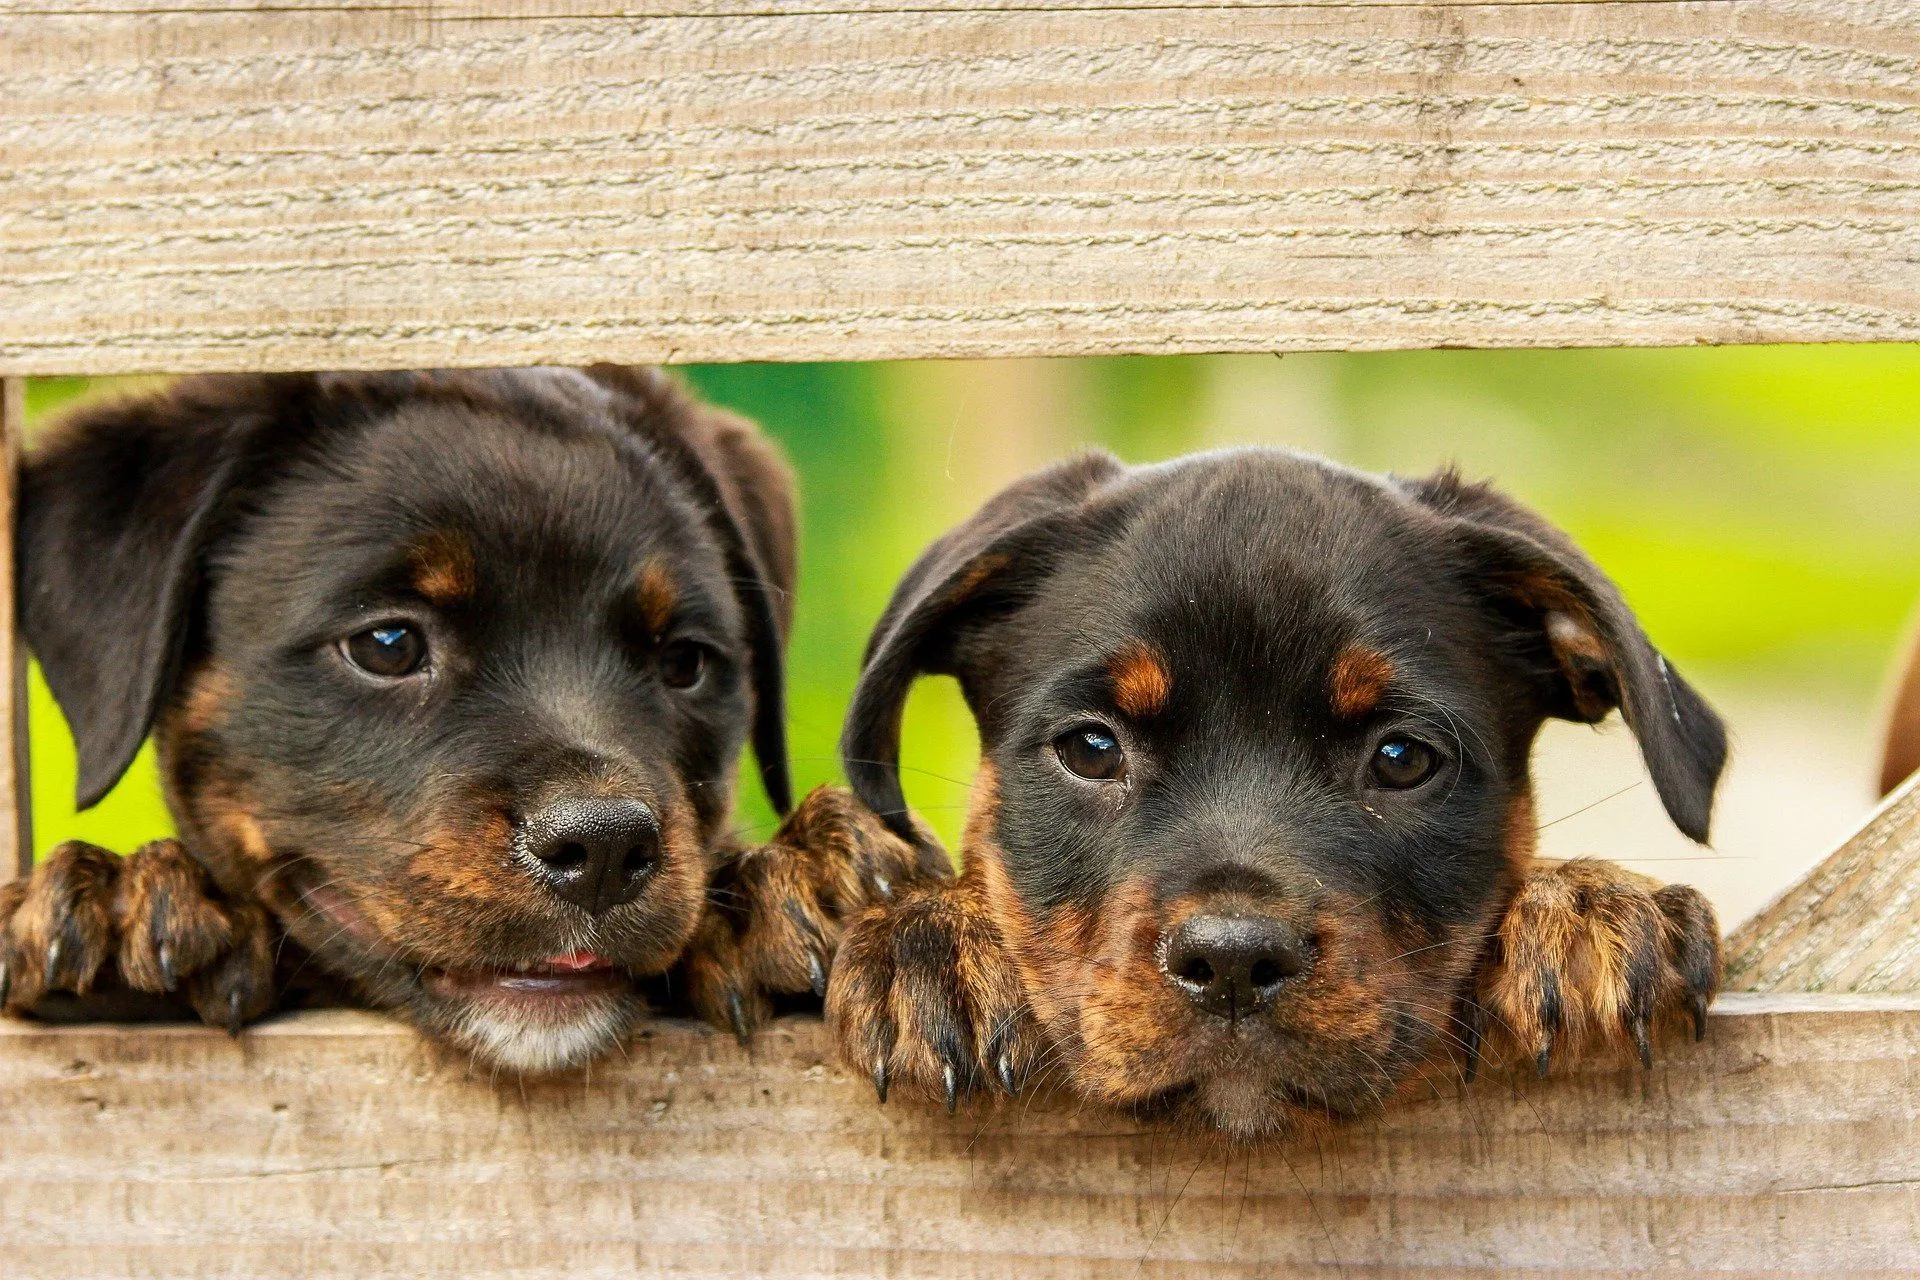 Two dog puppies peeking out of the fence